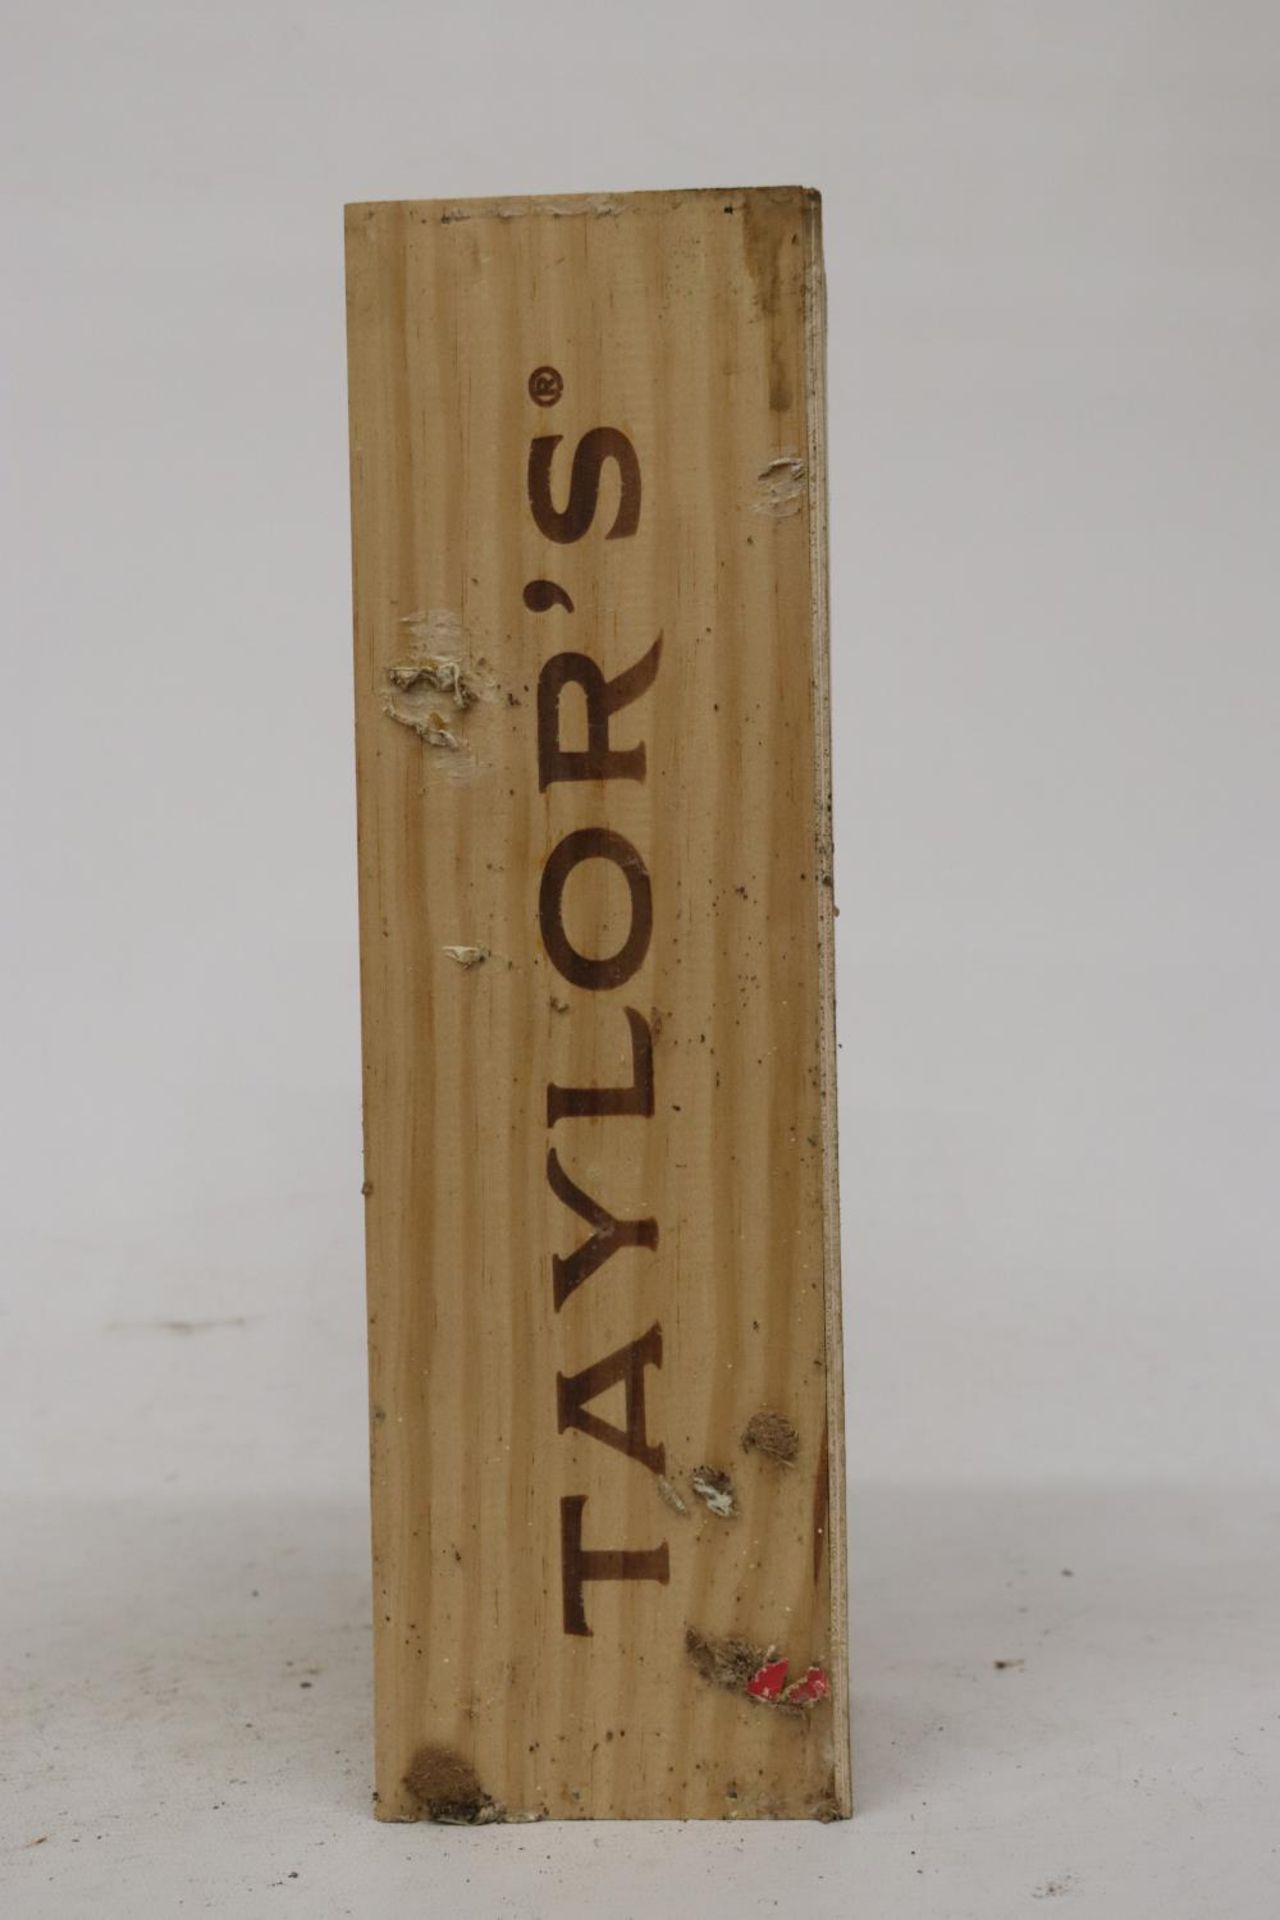 A BOTTLE OF TAYLOR'S 10 YEAR TAWNEY PORT IN WOODEN PRESENTATION BOX - Image 3 of 3